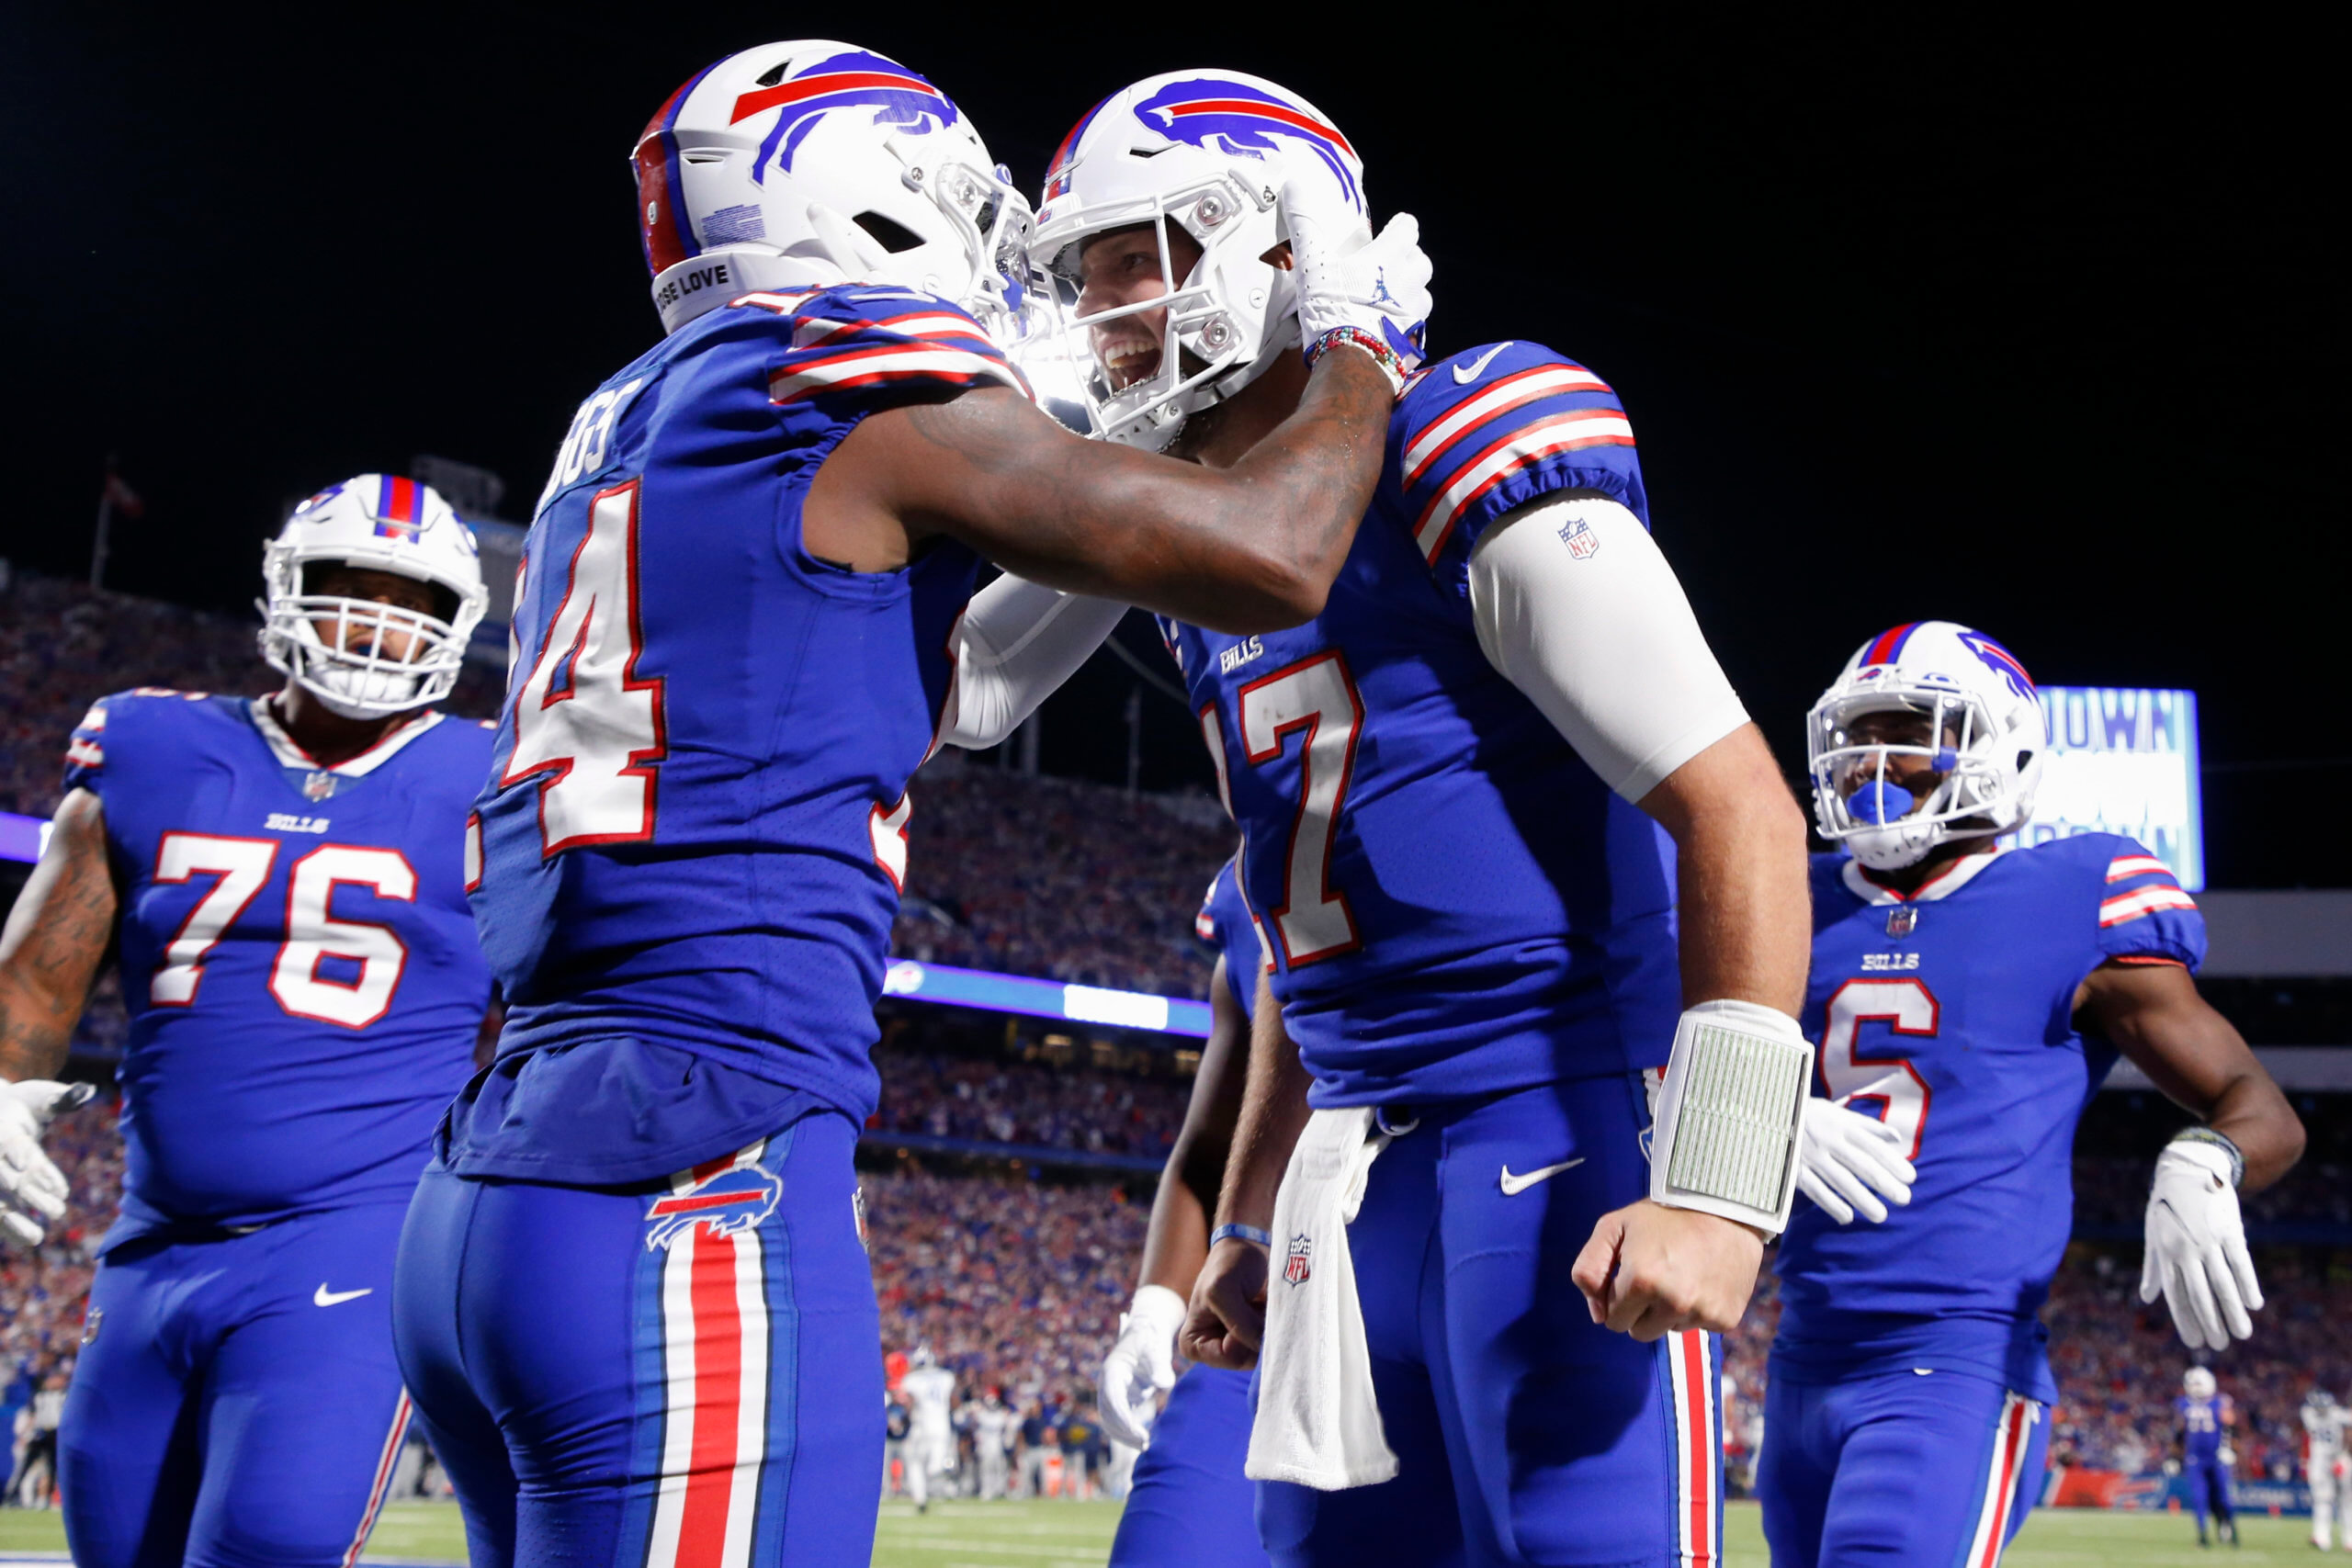 Banged-up Buffalo Bills take on the red-hot Miami Dolphins